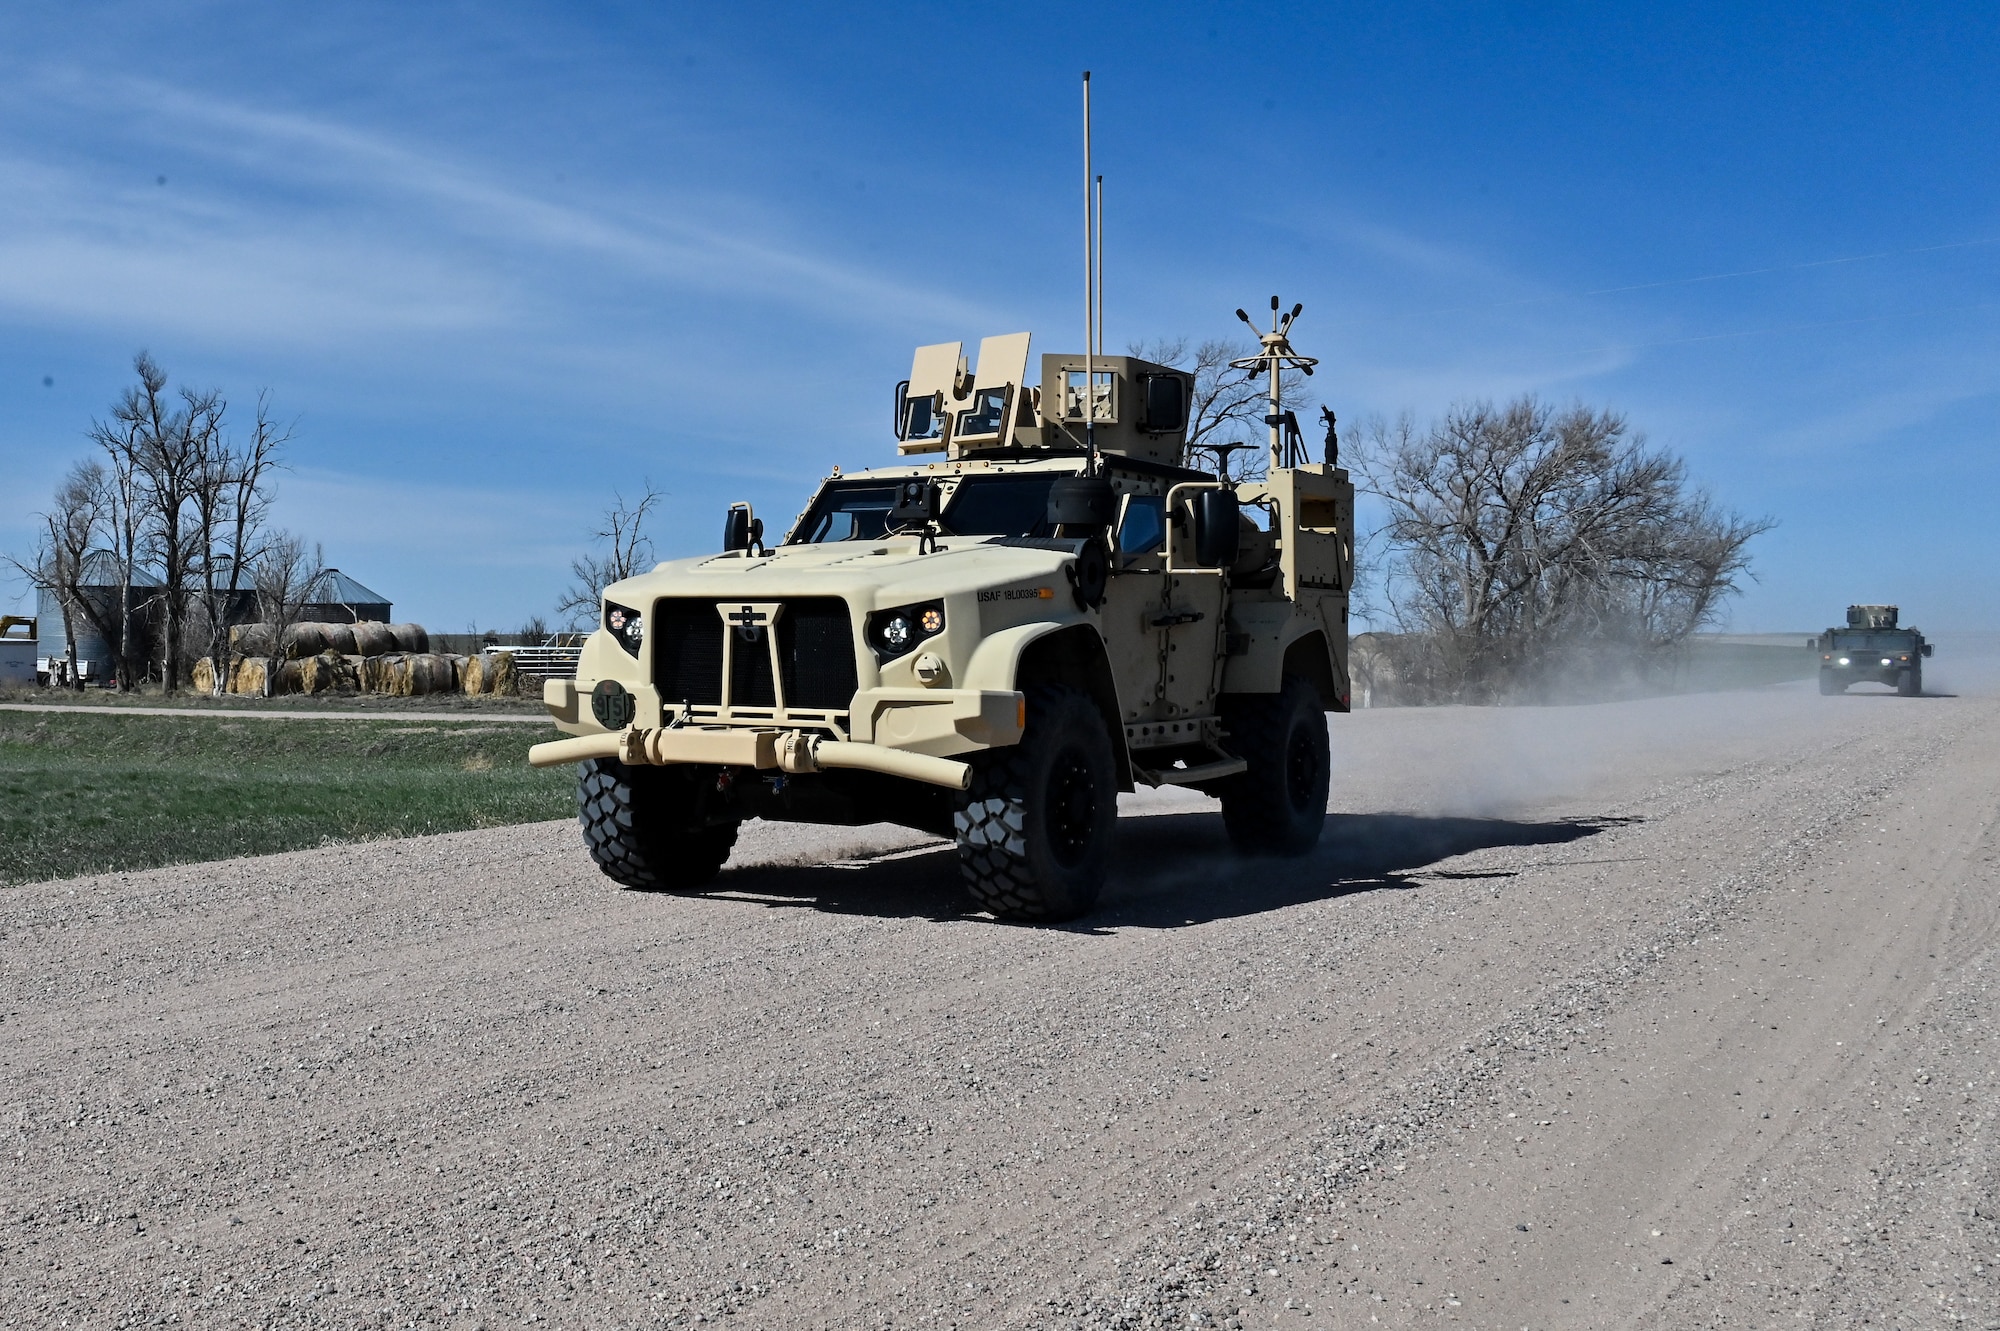 Airmen from the 90th Missile Security Forces Squadron conduct the first operational Joint Light Tactical Vehicle mission supporting maintenance at a launch facility near Harrisburg, Nebraska, April 24, 2023. This is the first step in modernizing the security forces vehicle fleet to provide more lethality and security for the nuclear enterprise. (Air Force photo by Joseph Coslett Jr.)